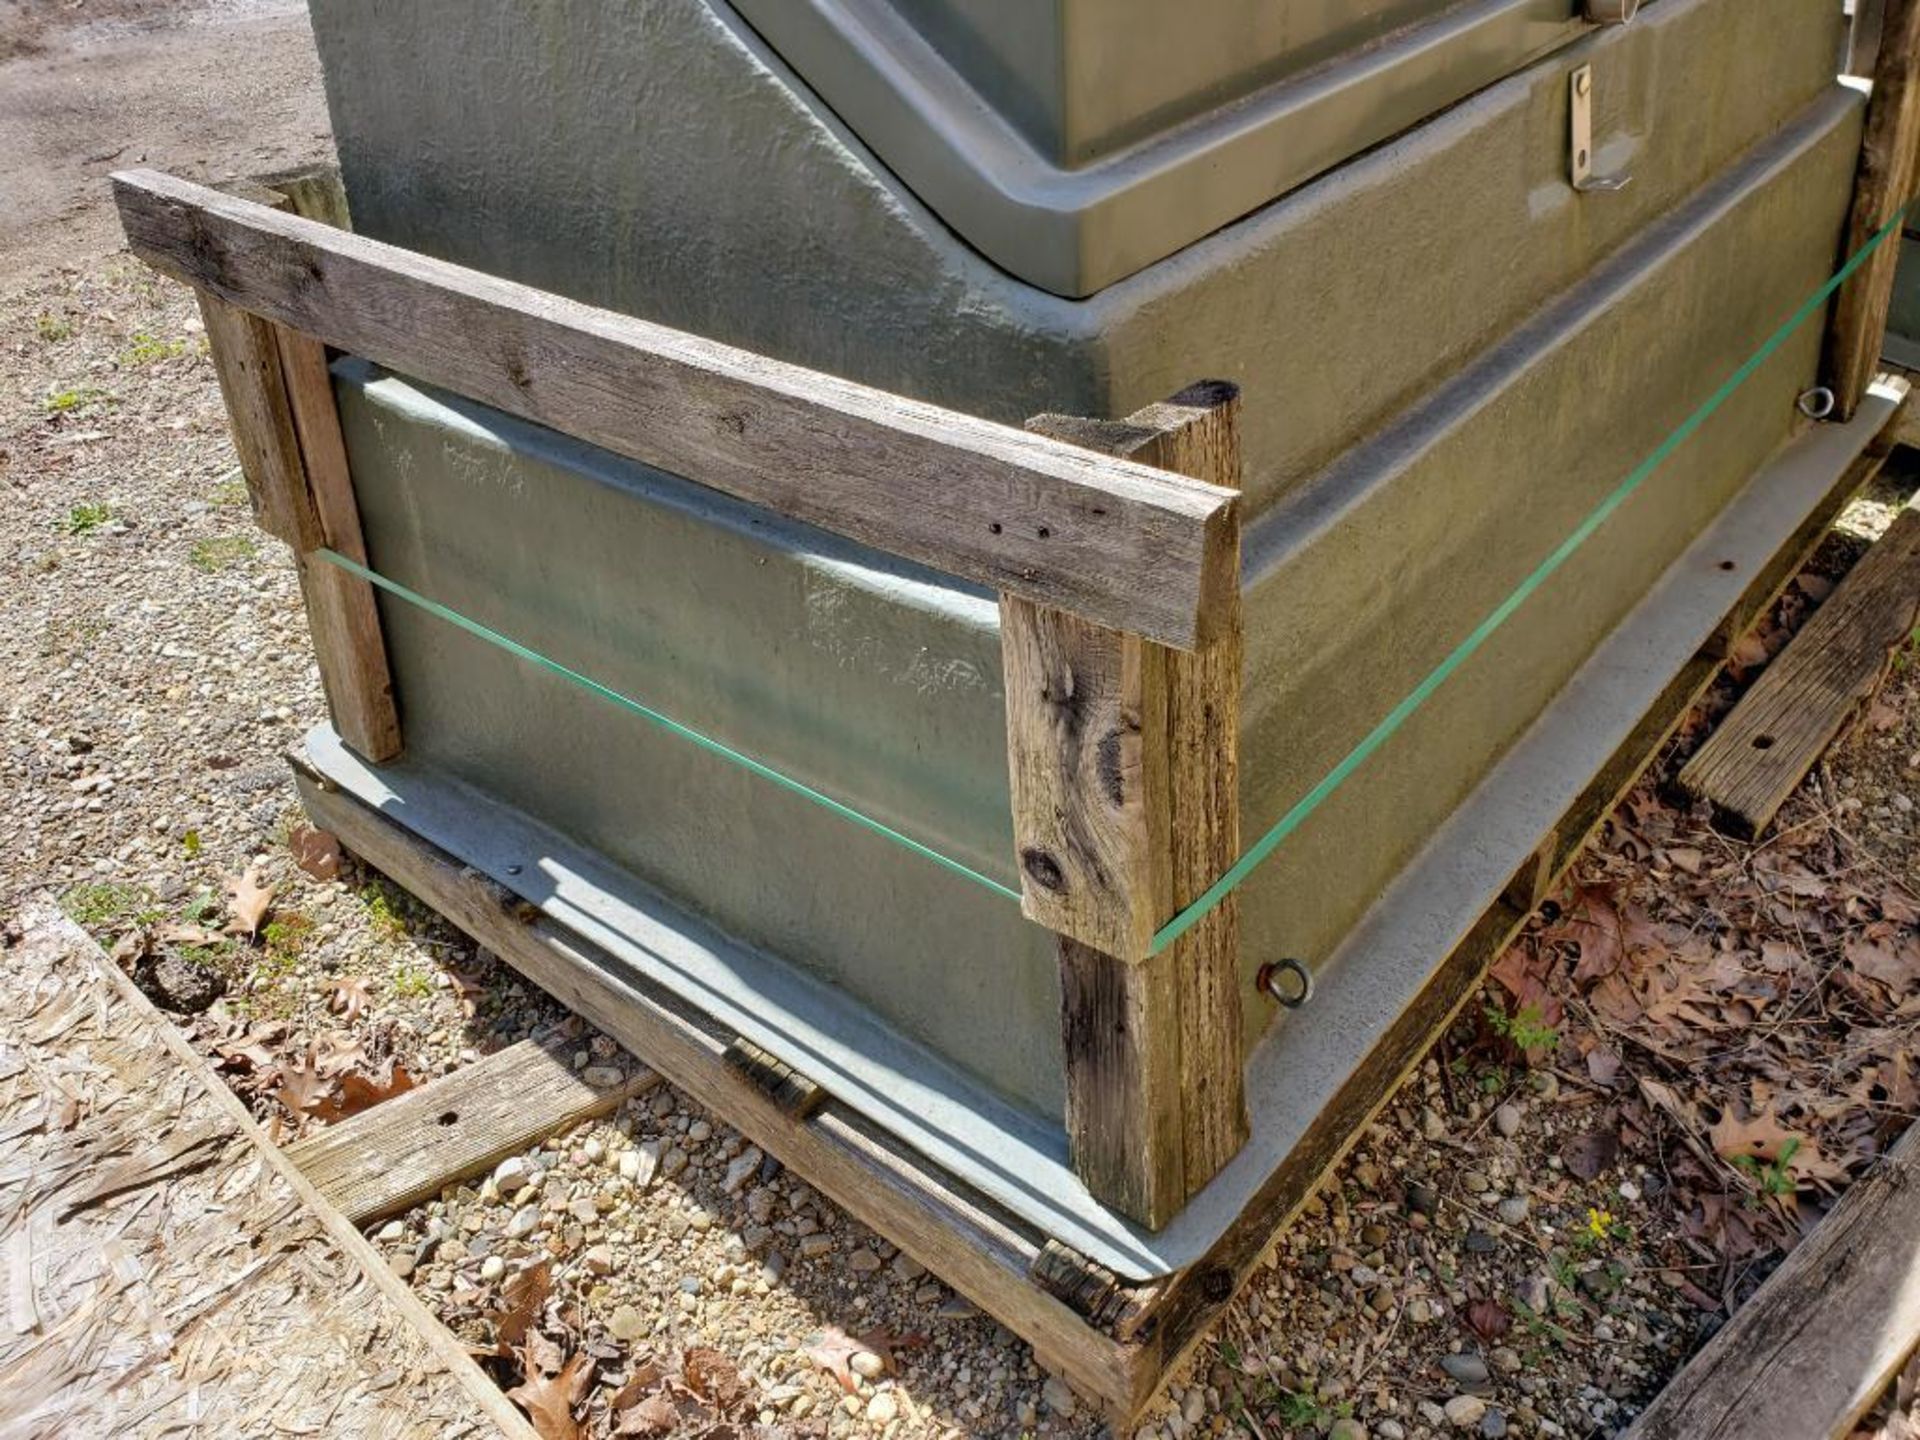 Nordic Utility enclosure. 74in x 46in x 49in. - Image 3 of 7